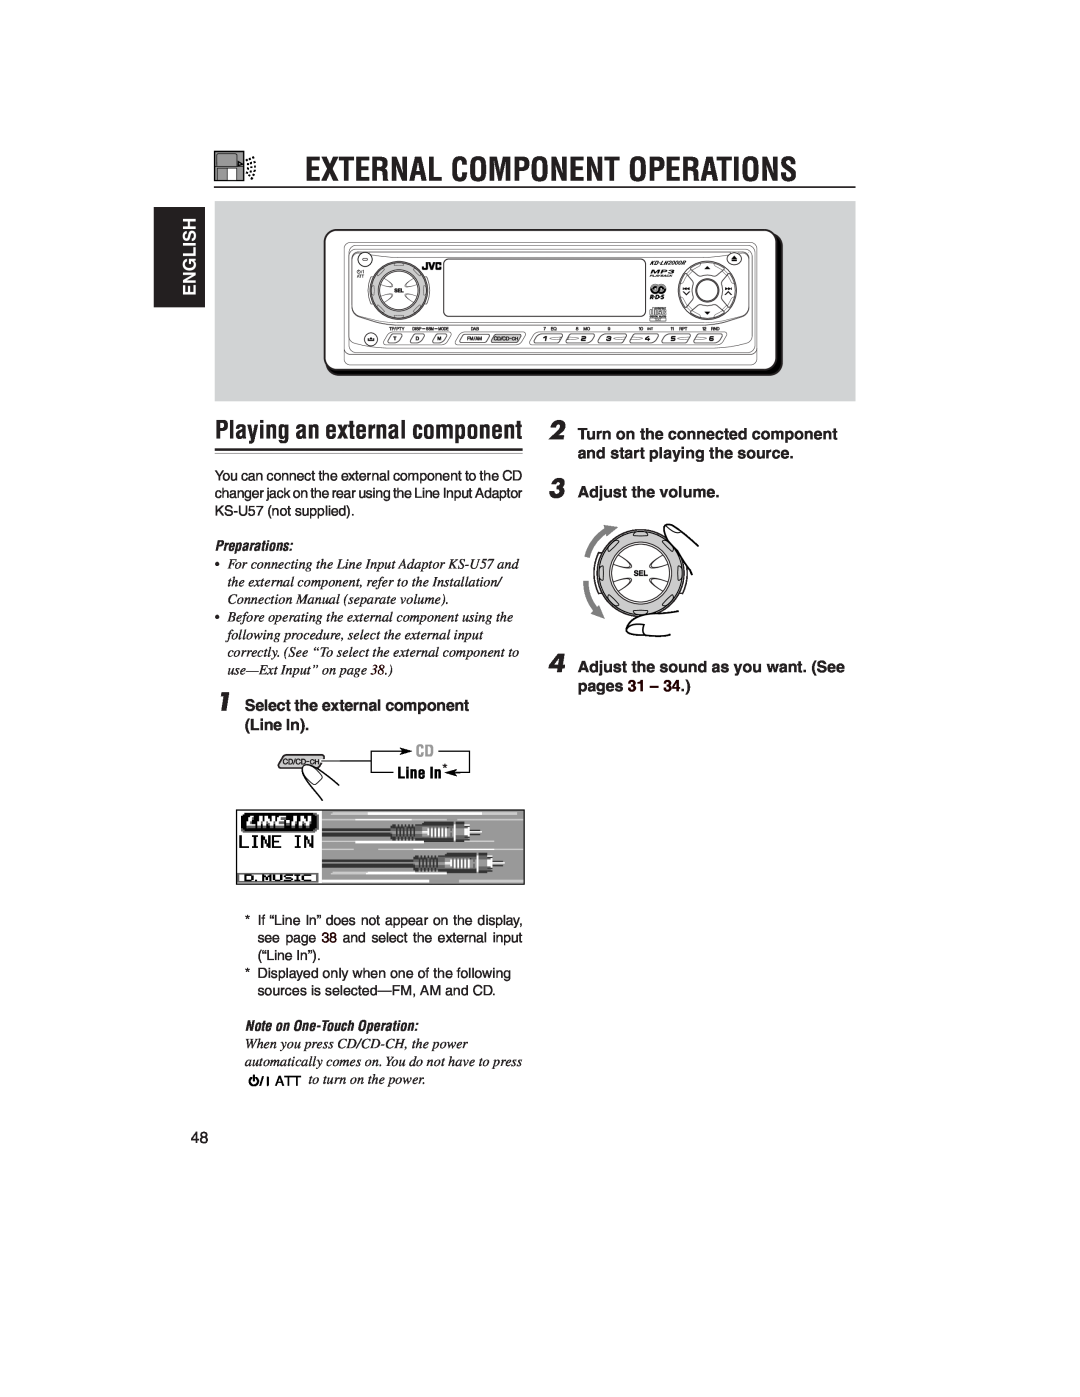 JVC KD-LH2000R manual Playing an external component, External Component Operations, English, Line In, Adjust the volume 